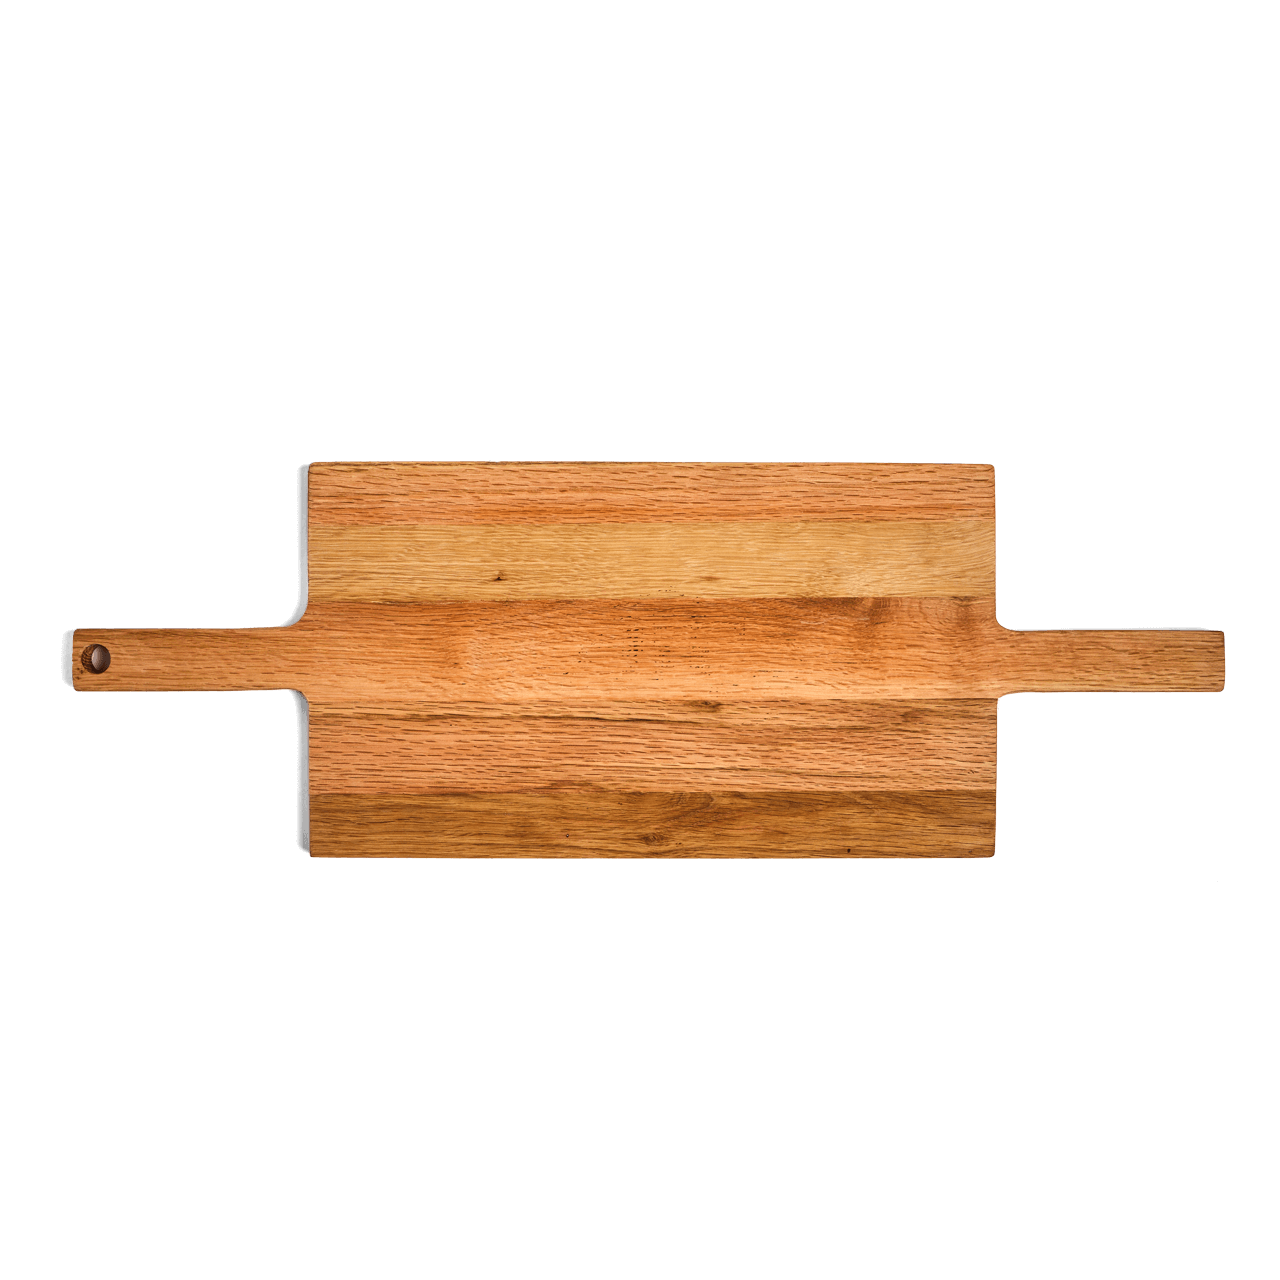 How do you maintain a wooden handle? We will tell you how!